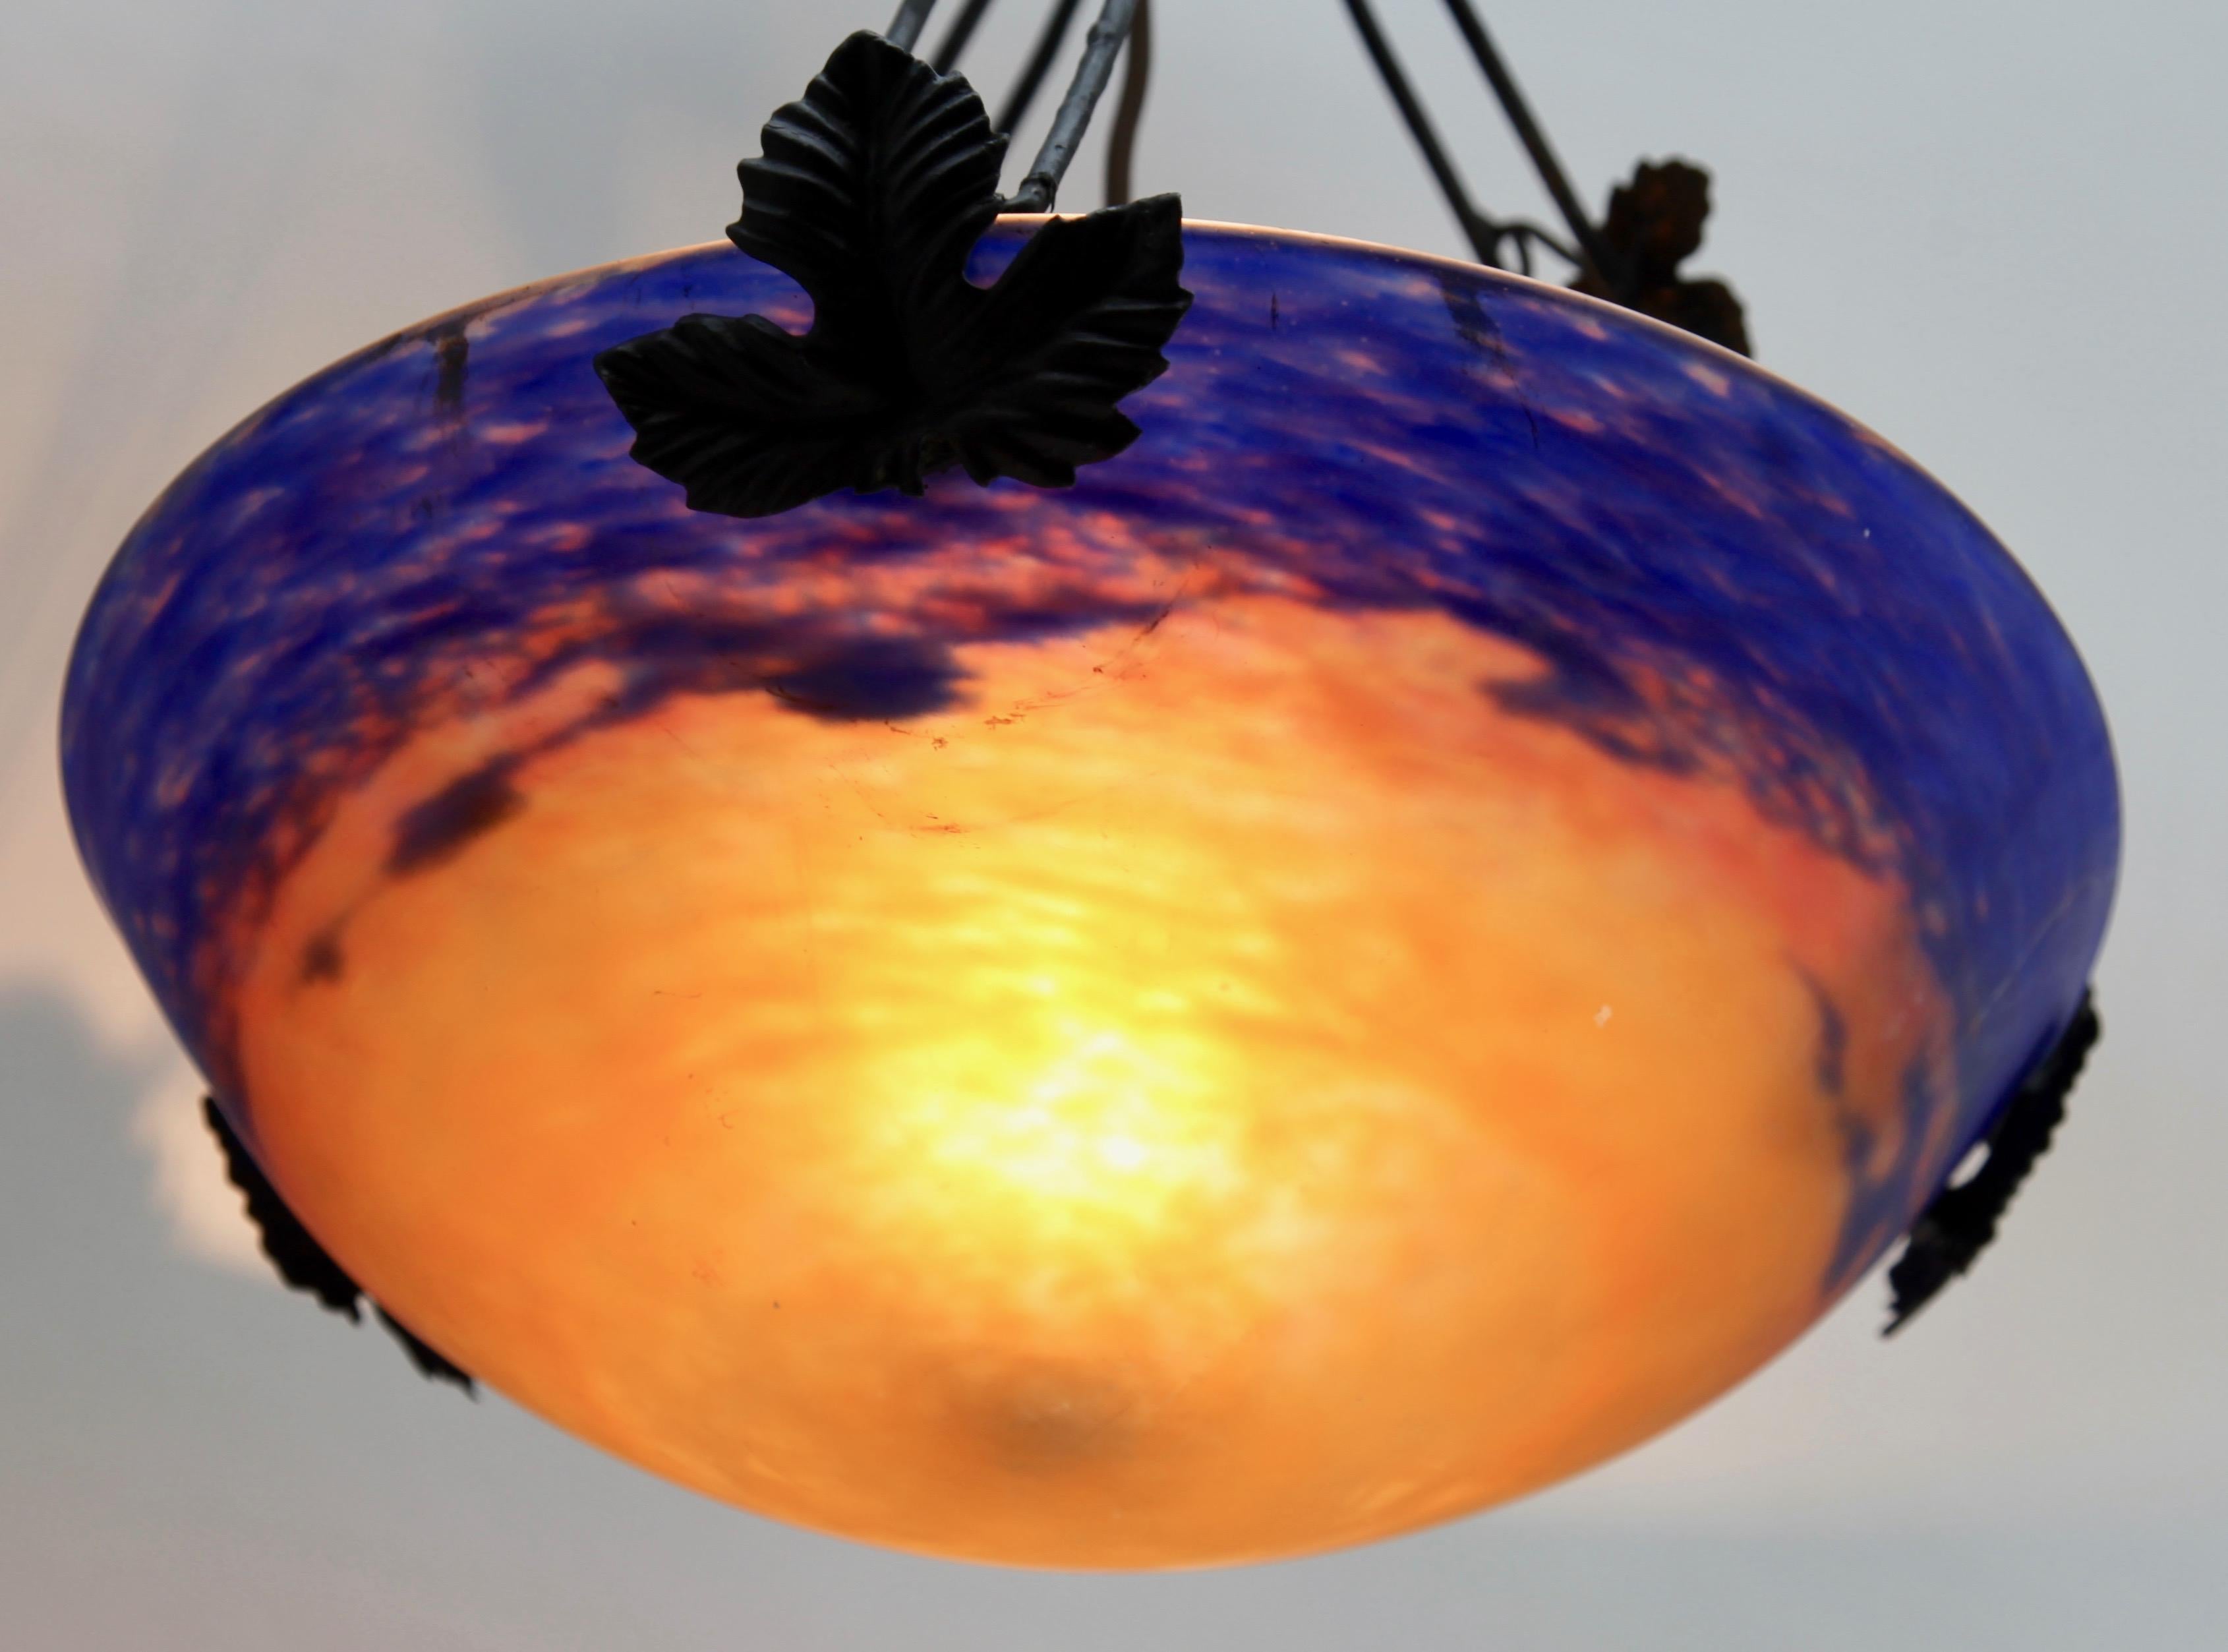 Art Nouveau style lampshade, fully signed, by Muller Freres, Luneville, circa 1925
Mottled glass shade with 'Sunset' decor of orange surrounded by cloudy blue. Colored powders are applied between two layers to create the effect, and acid-etched